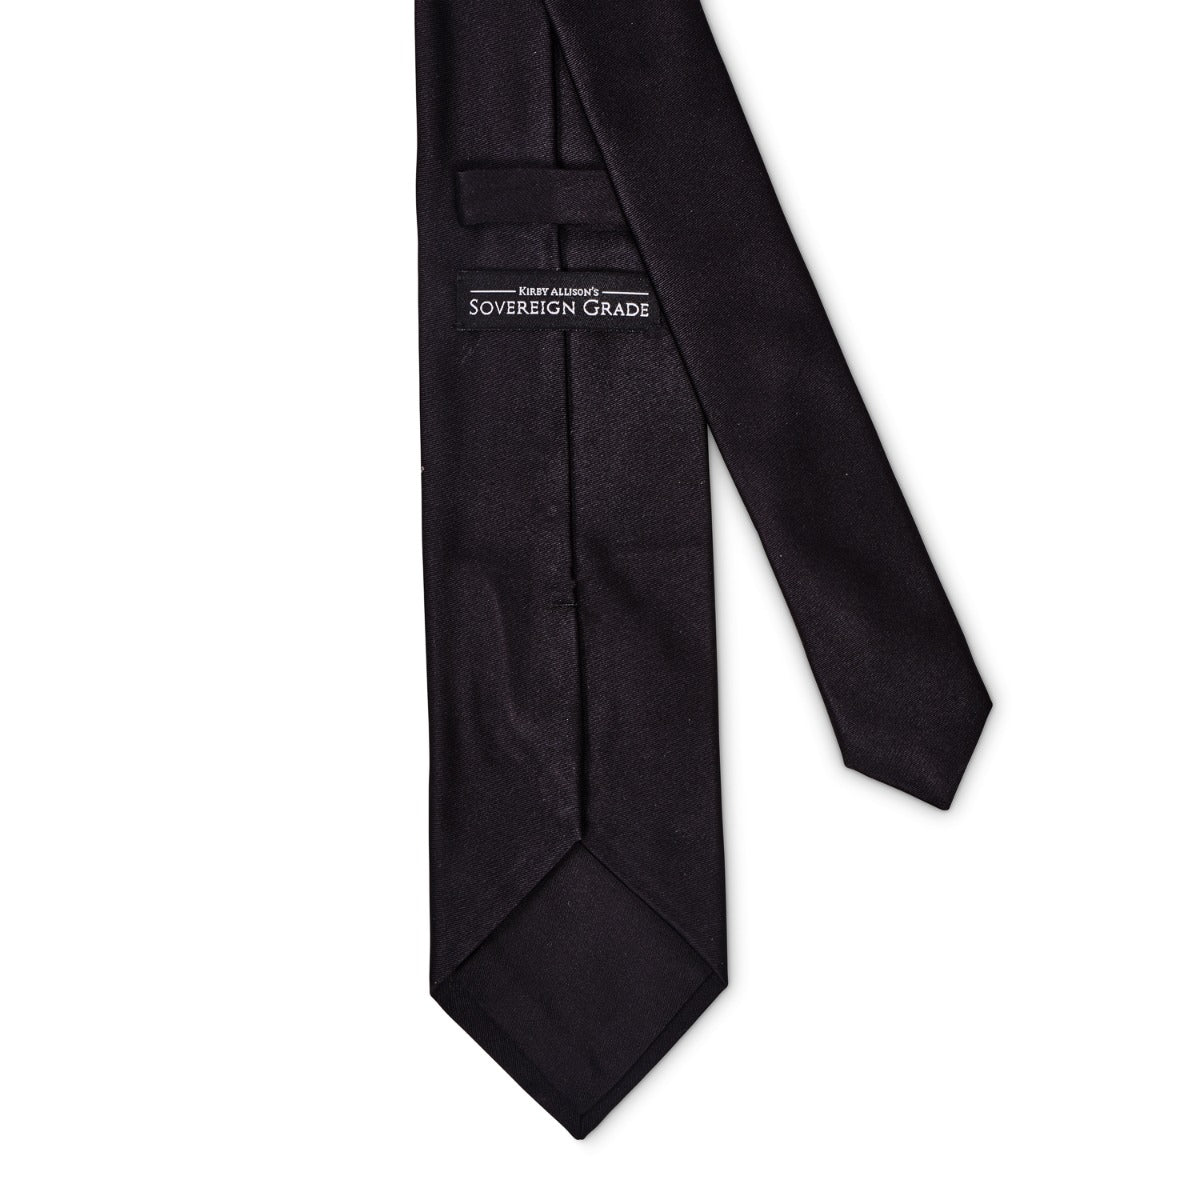 A Sovereign Grade Black Solid Satin Tie handmade in the United Kingdom using 100% English silk, available at KirbyAllison.com.